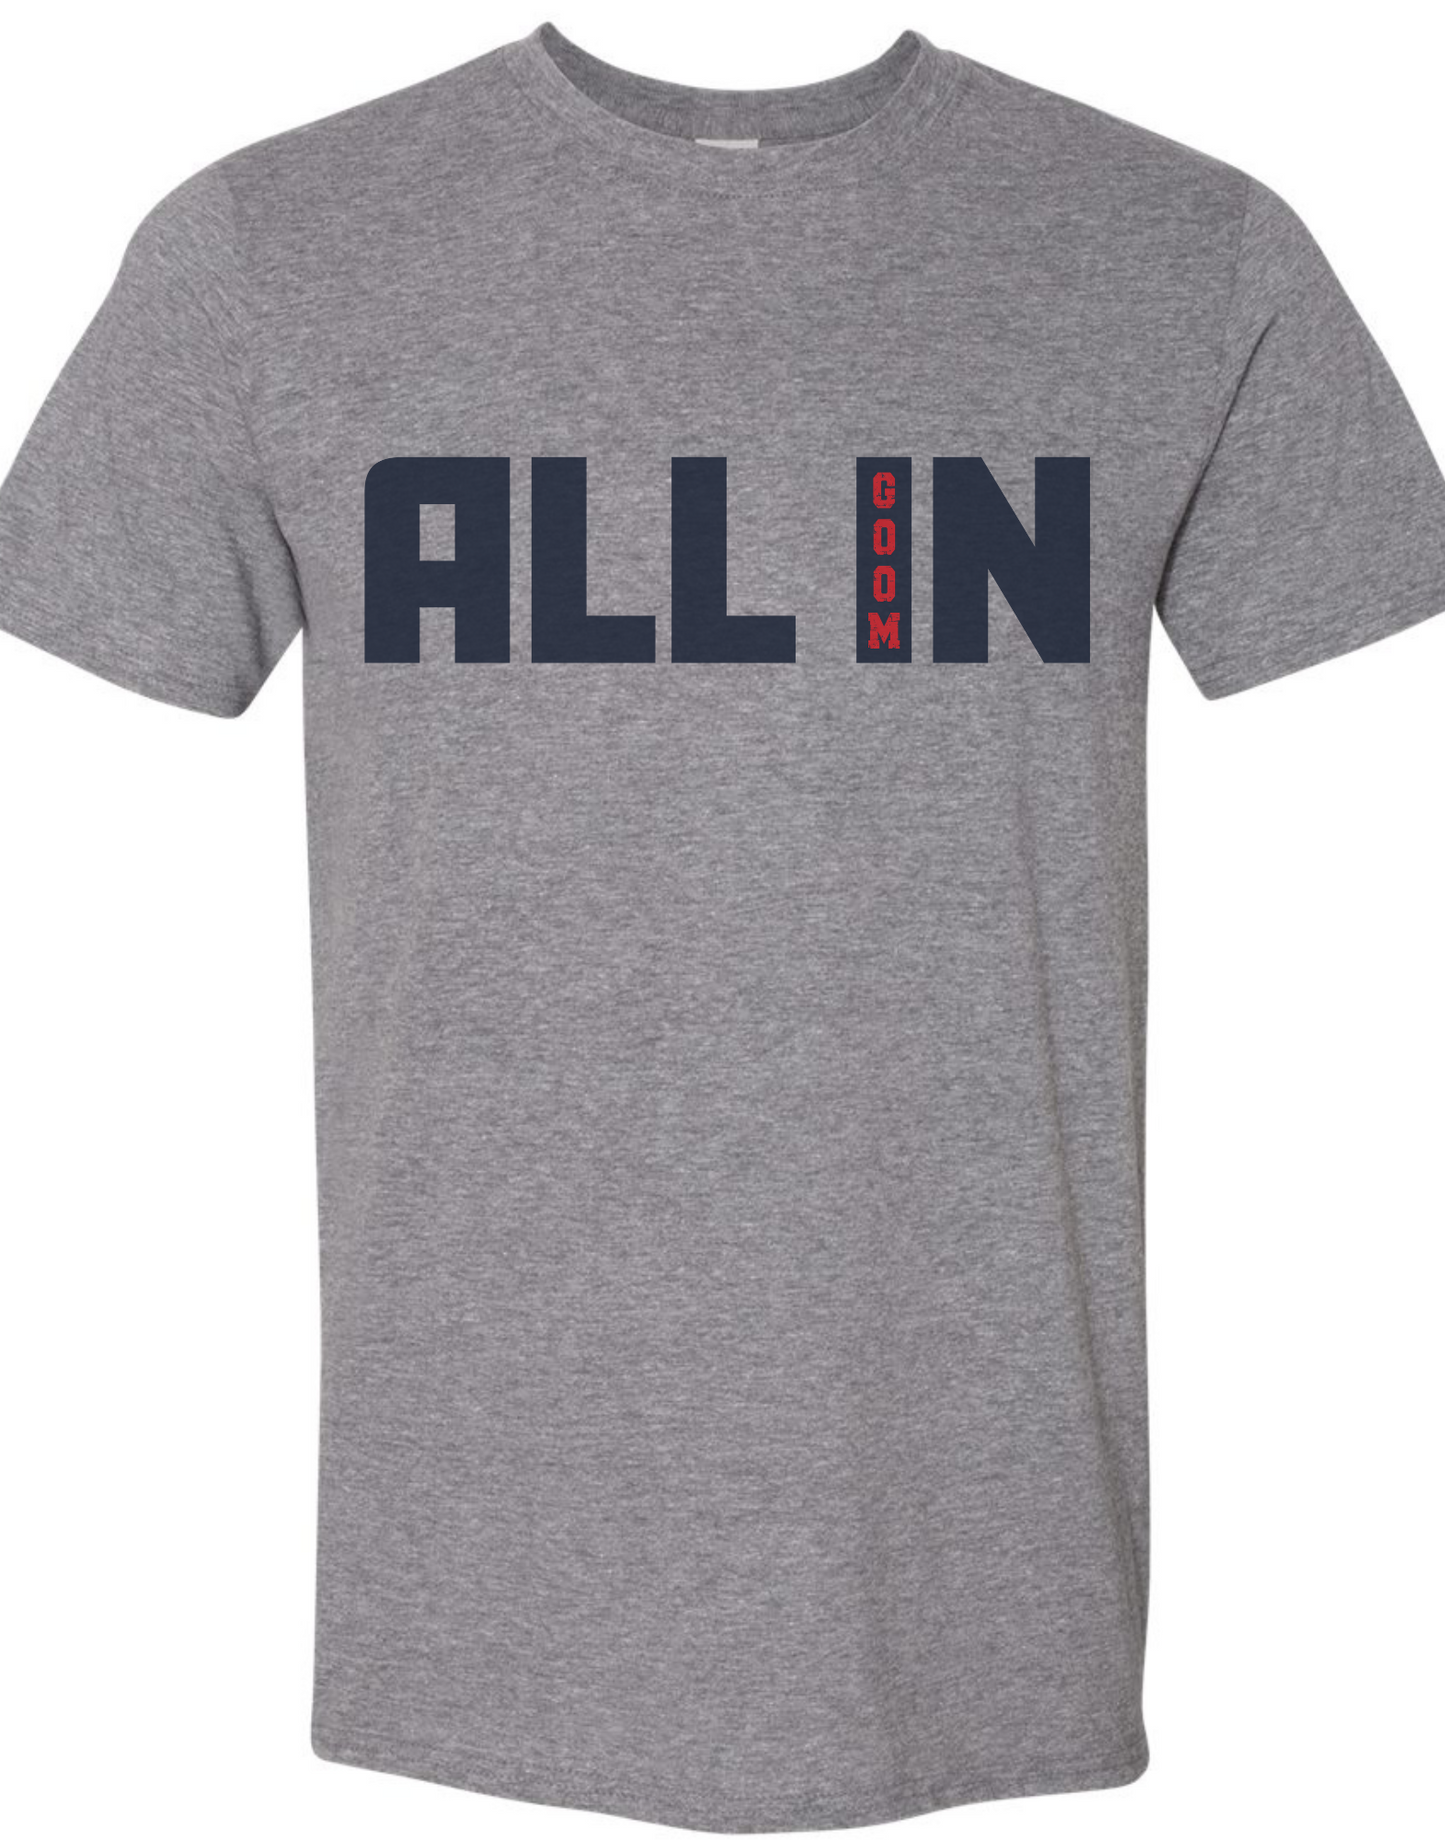 YOUTH  ALL IN GOOM T-shirts